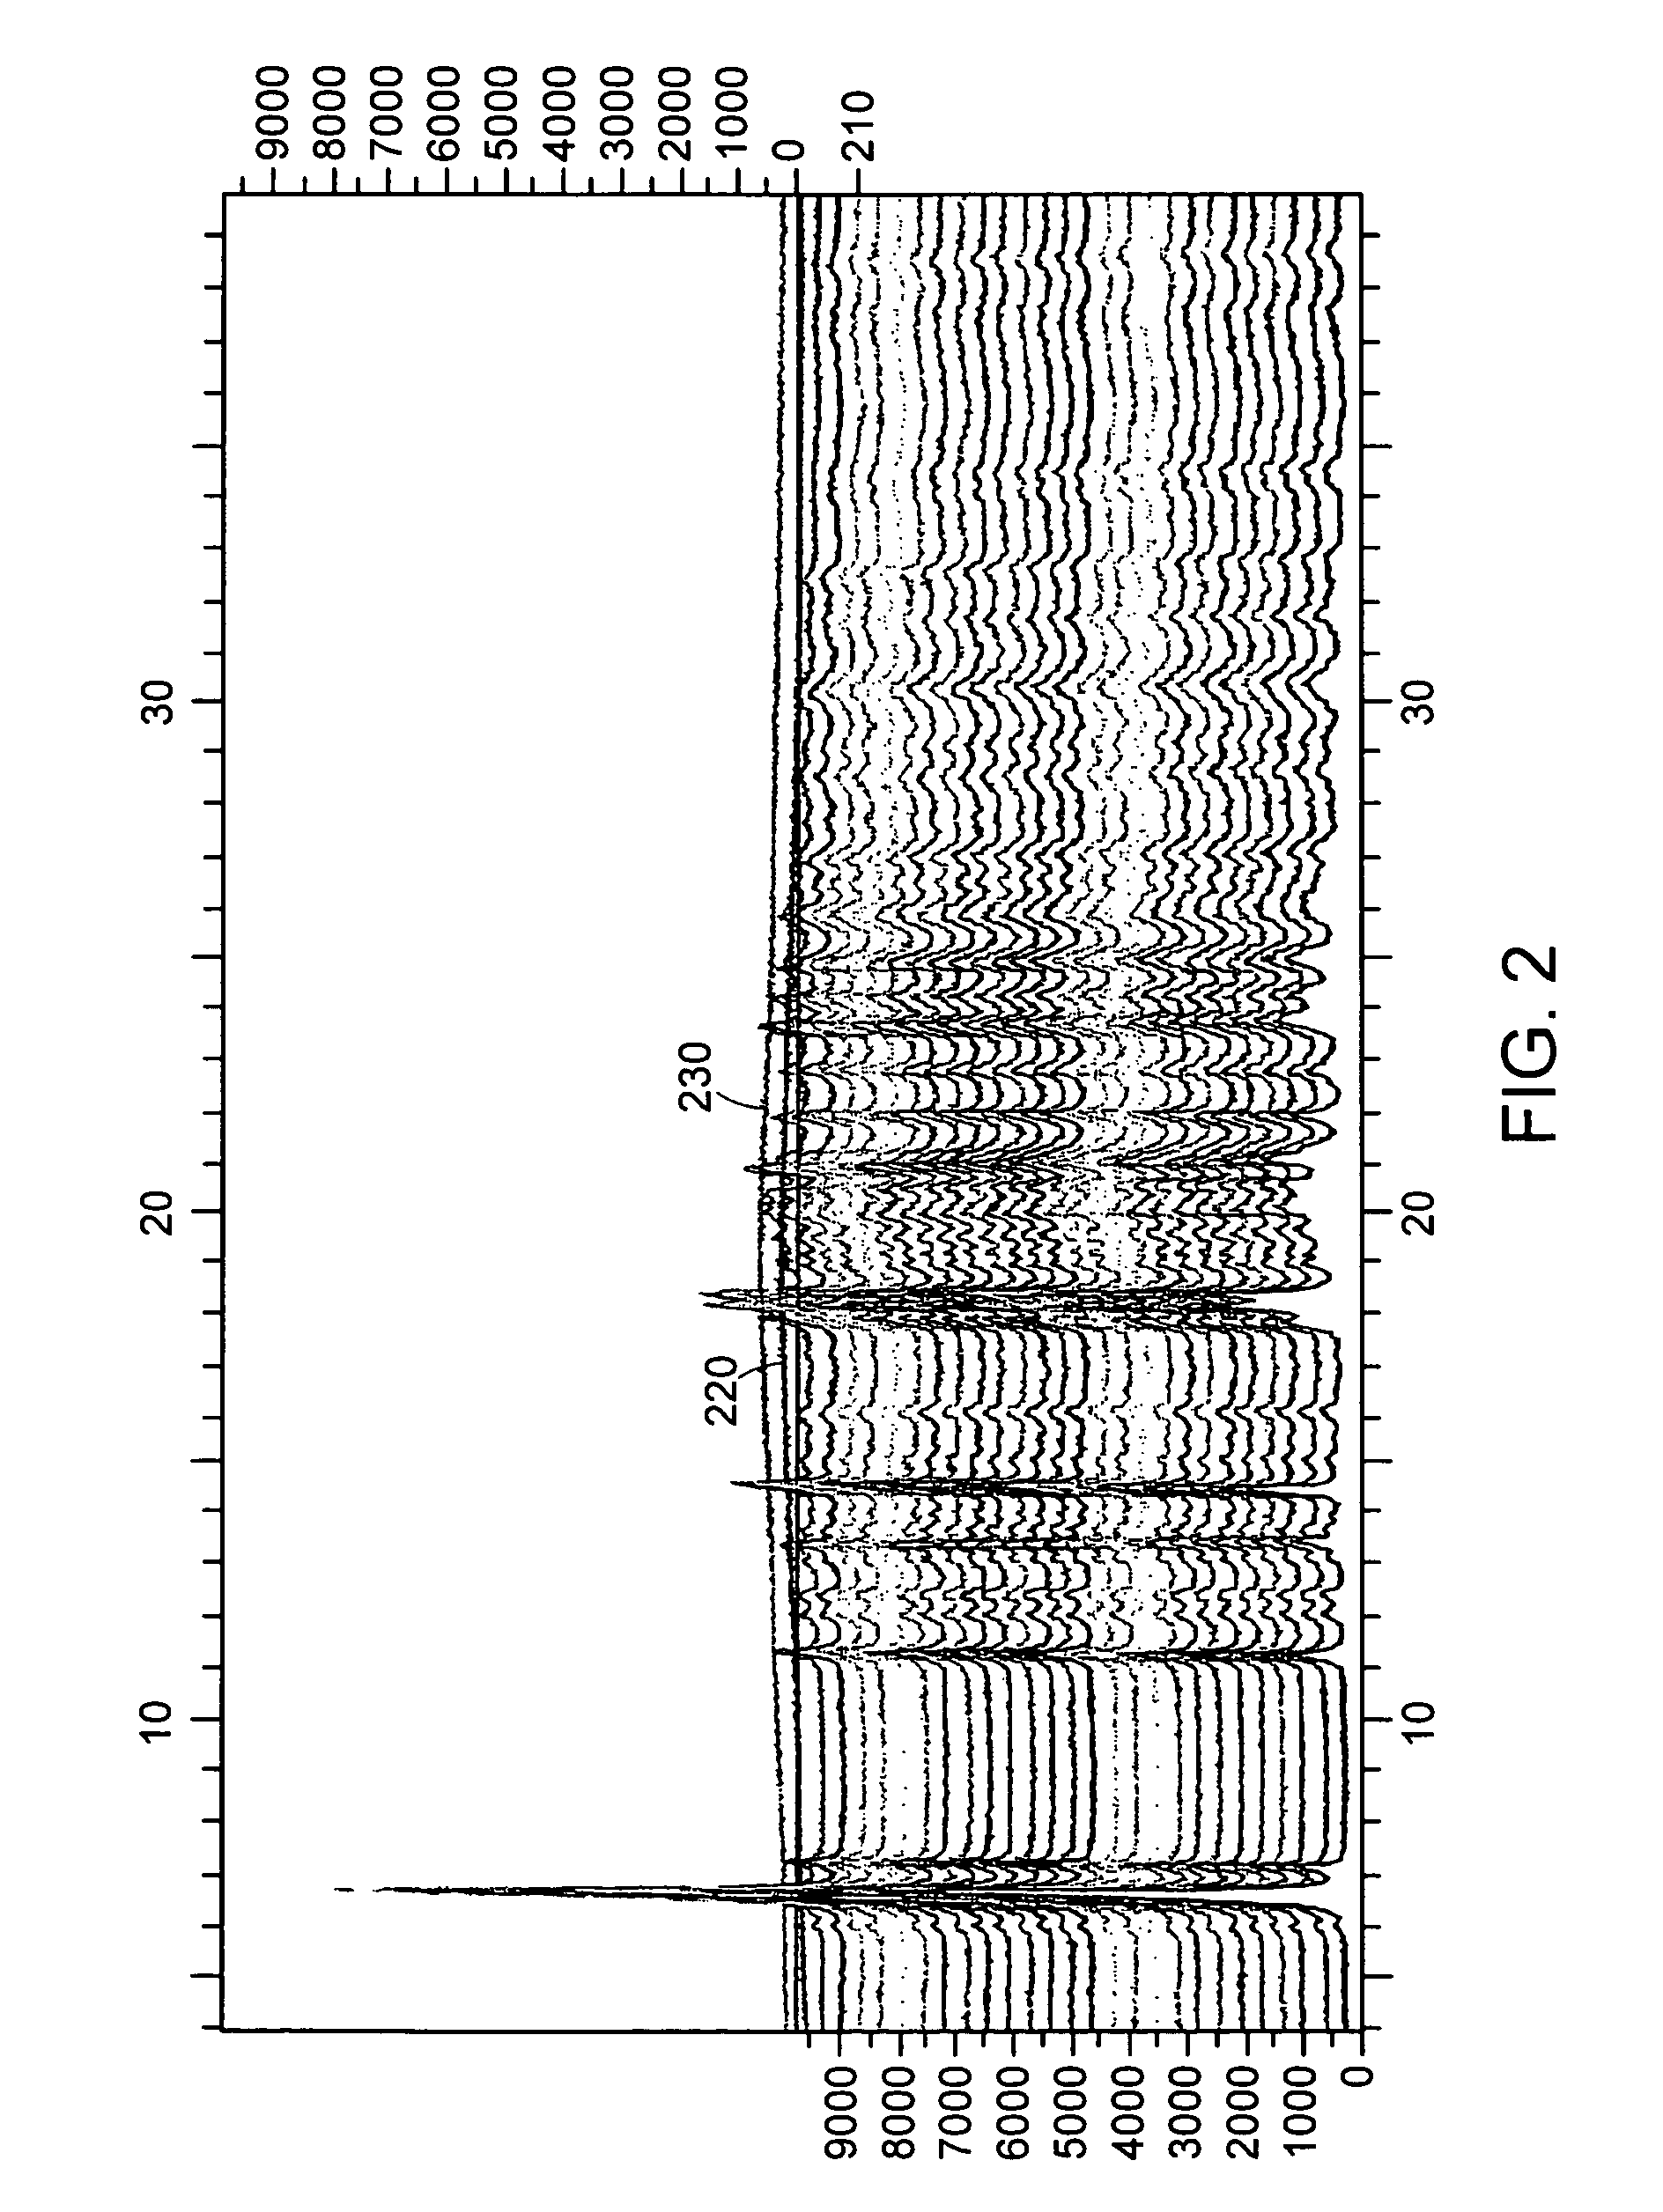 Solid forms of a chemokine receptor antagonist and methods of use thereof